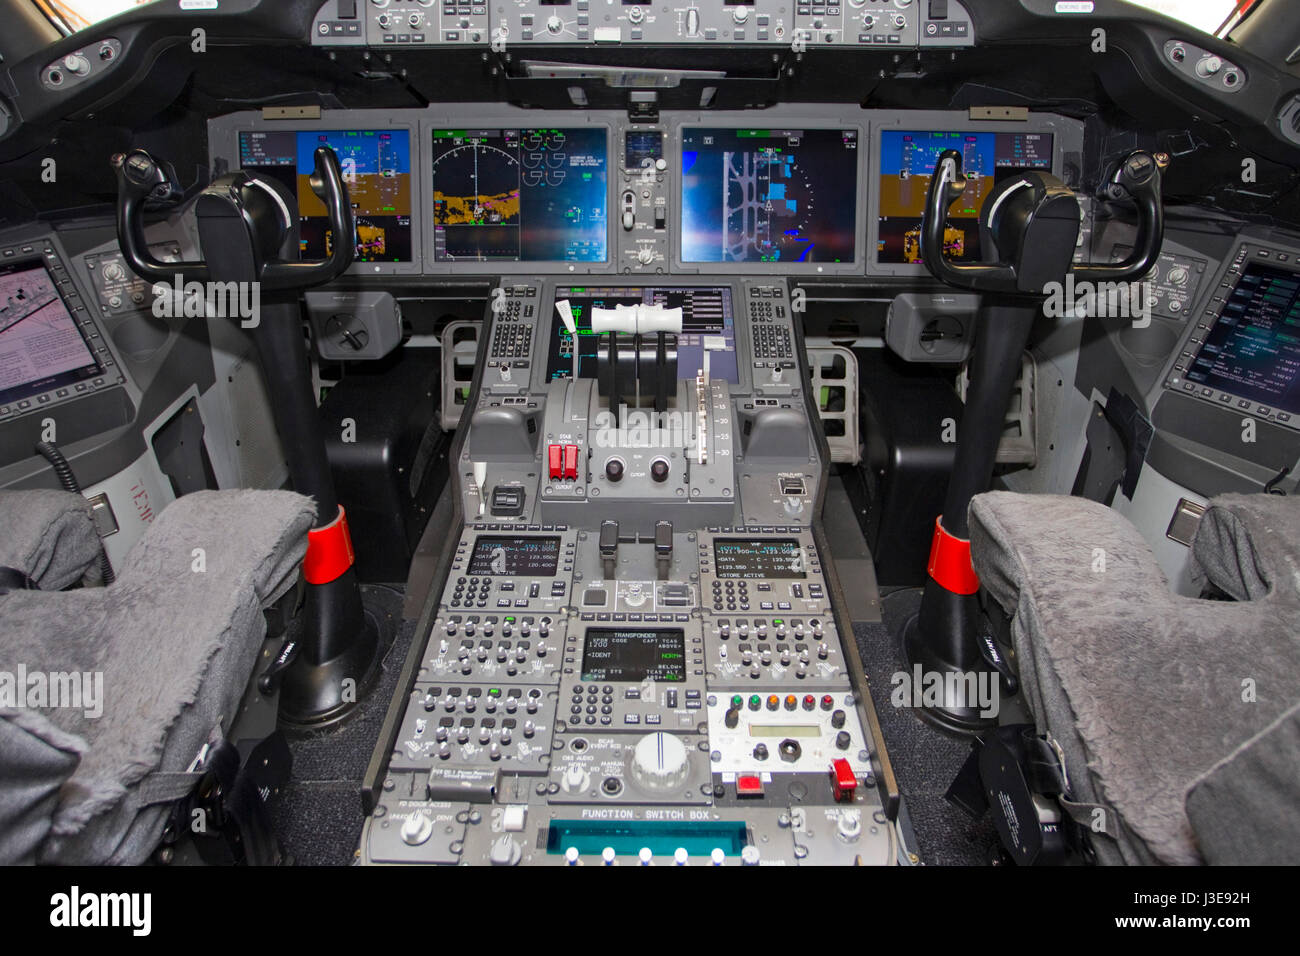 Boeing 787 Cockpit High Resolution Stock Photography and Images - Alamy